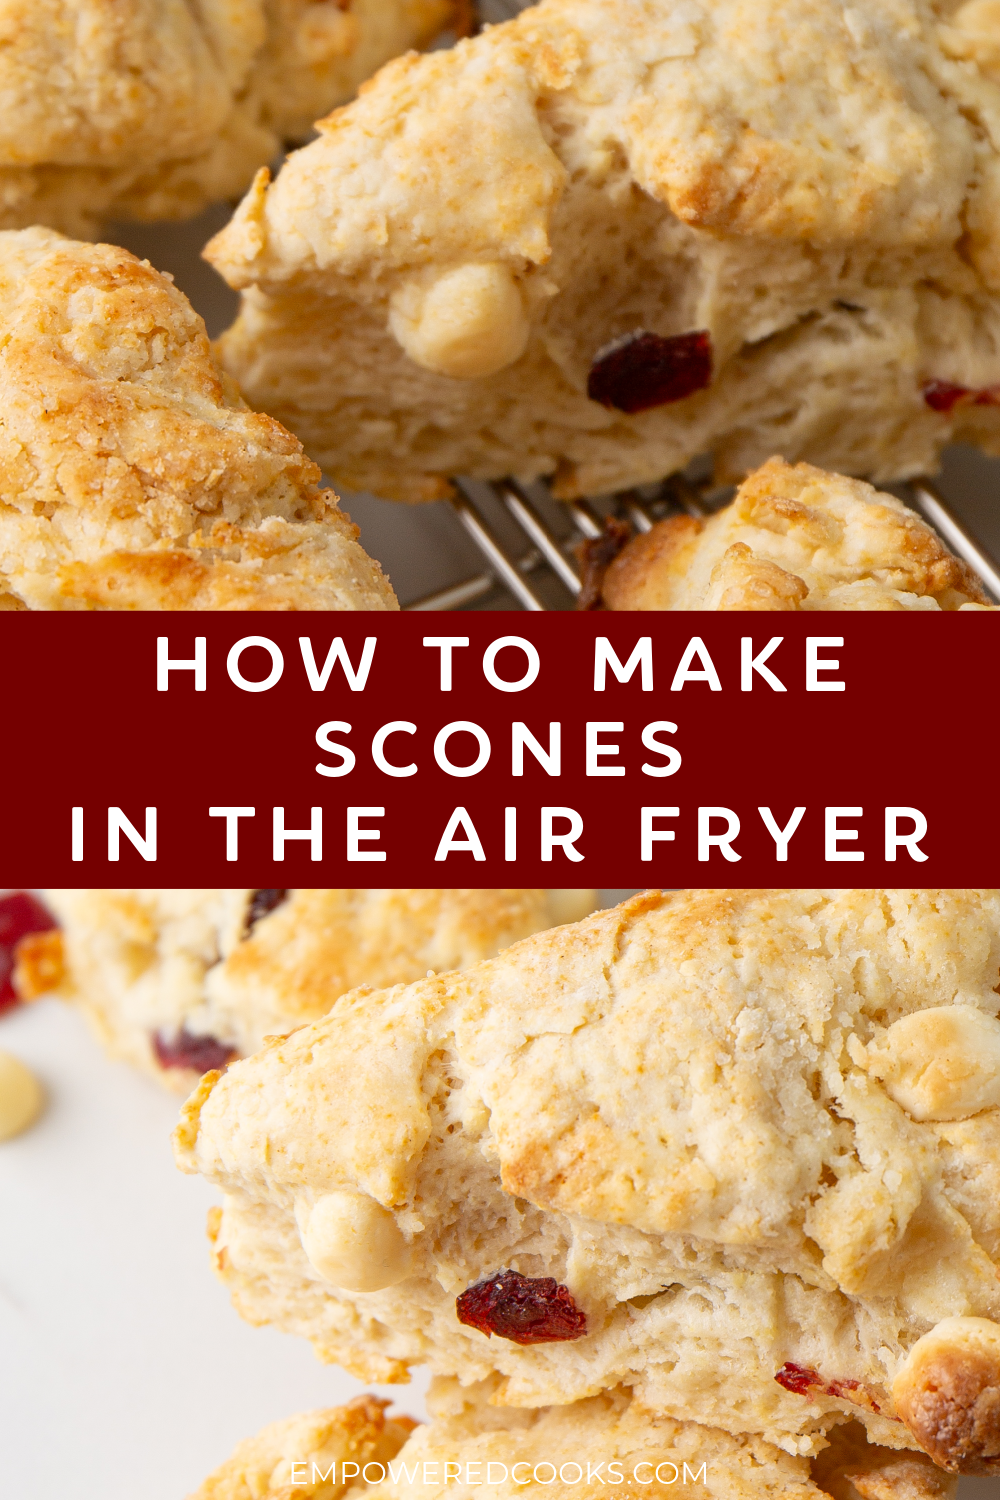 How to make scones in the air fryer